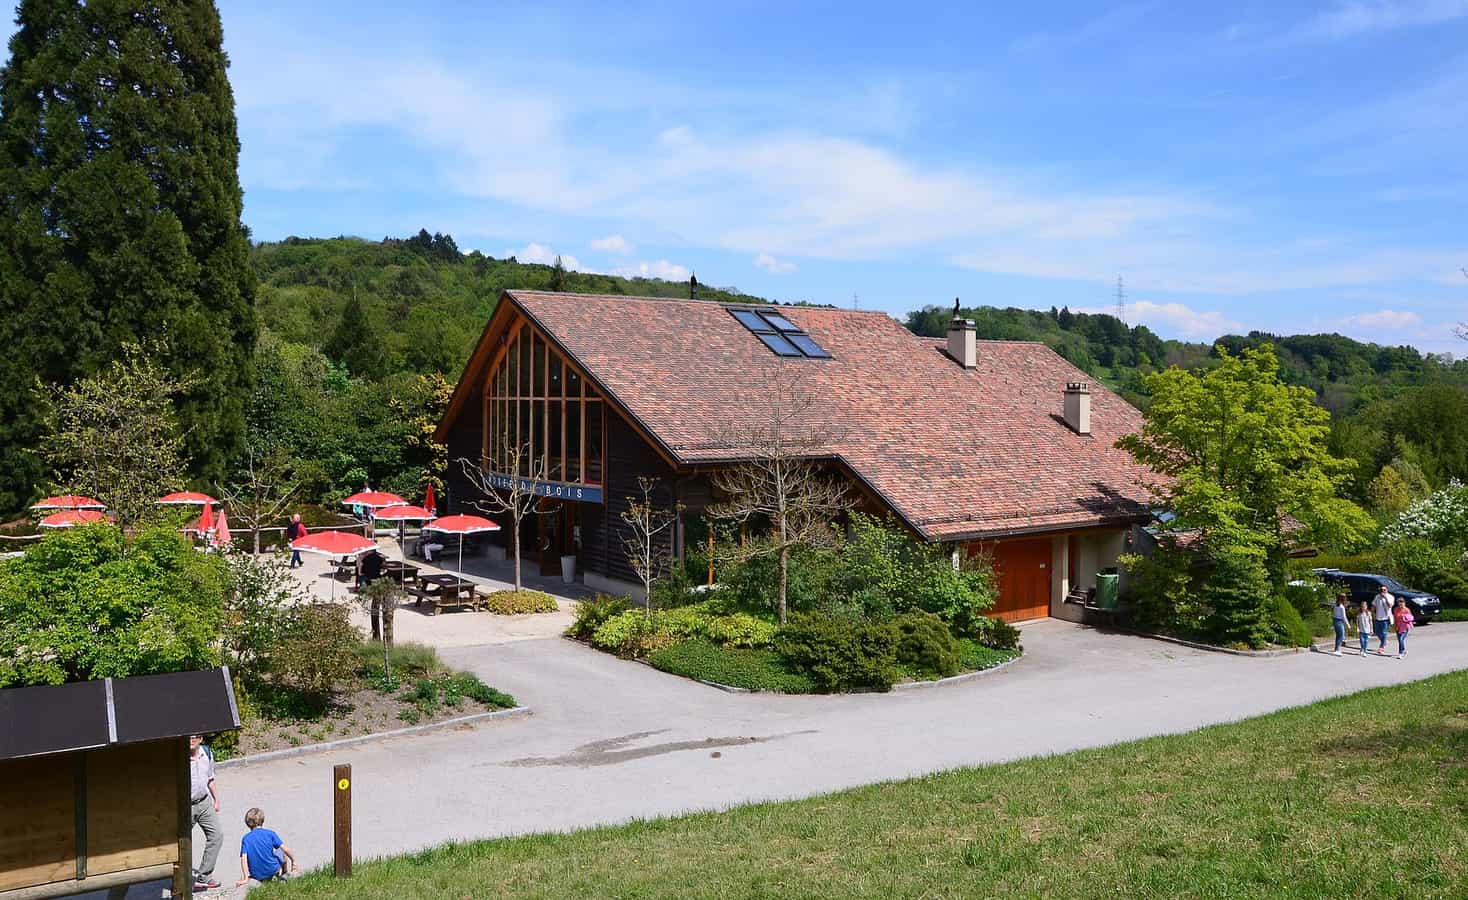 The museum of wood of the Aubonne's valley's arboretum